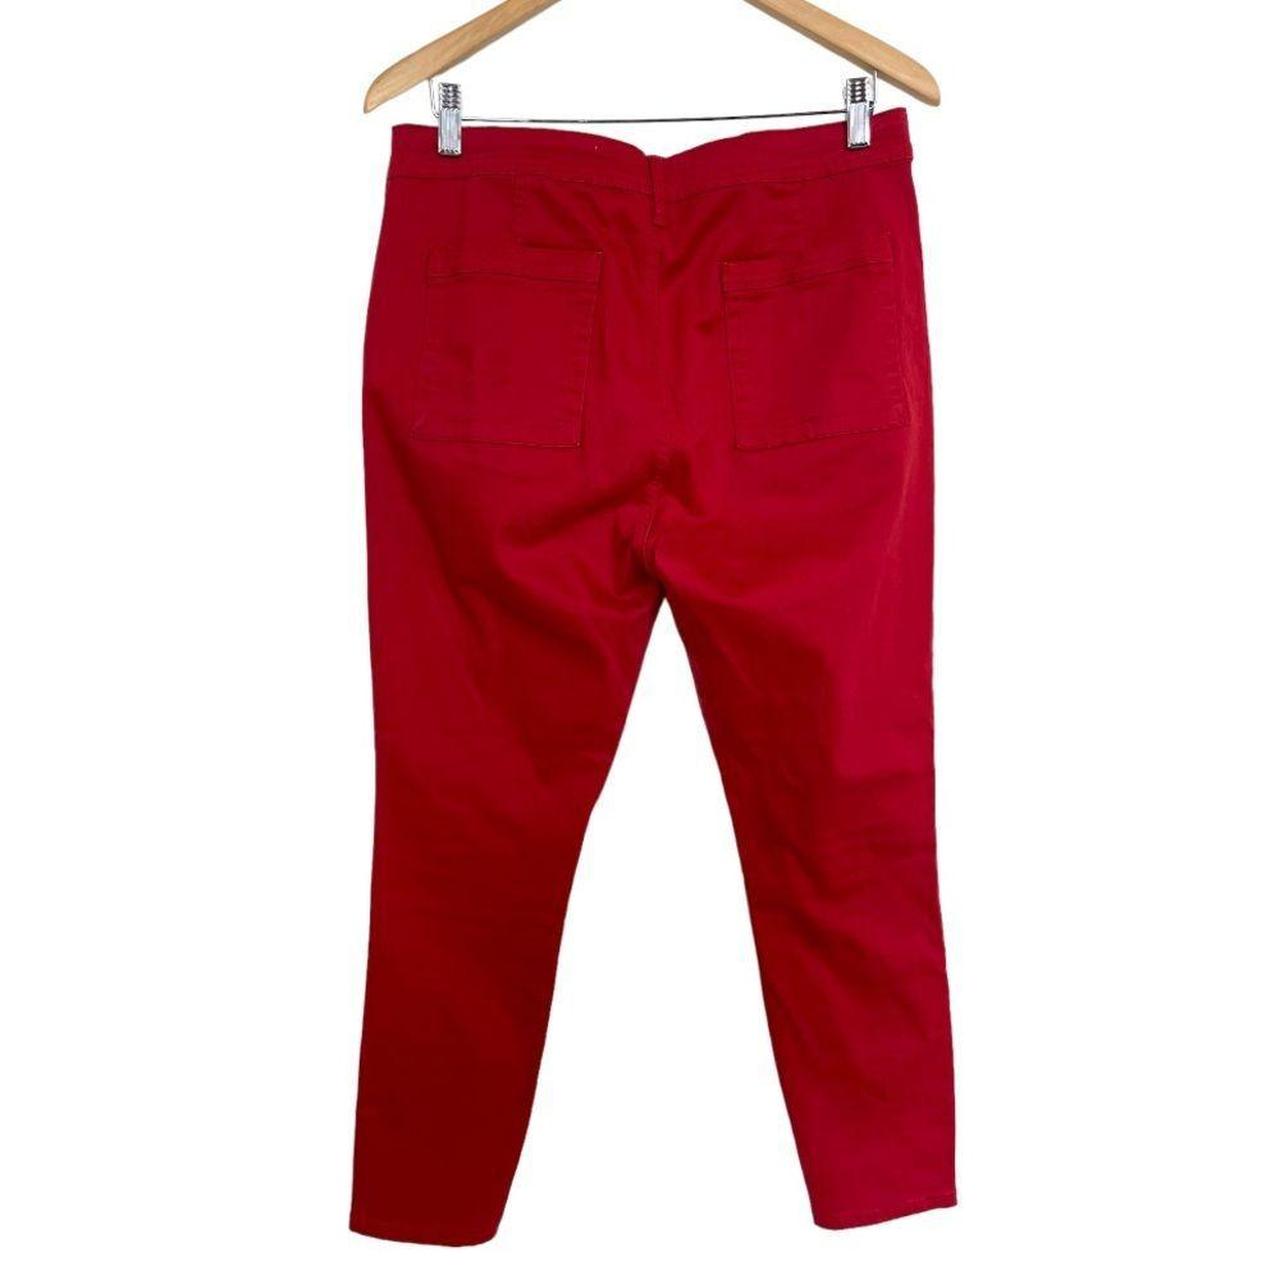 A Loves A Women's Red Trousers (2)